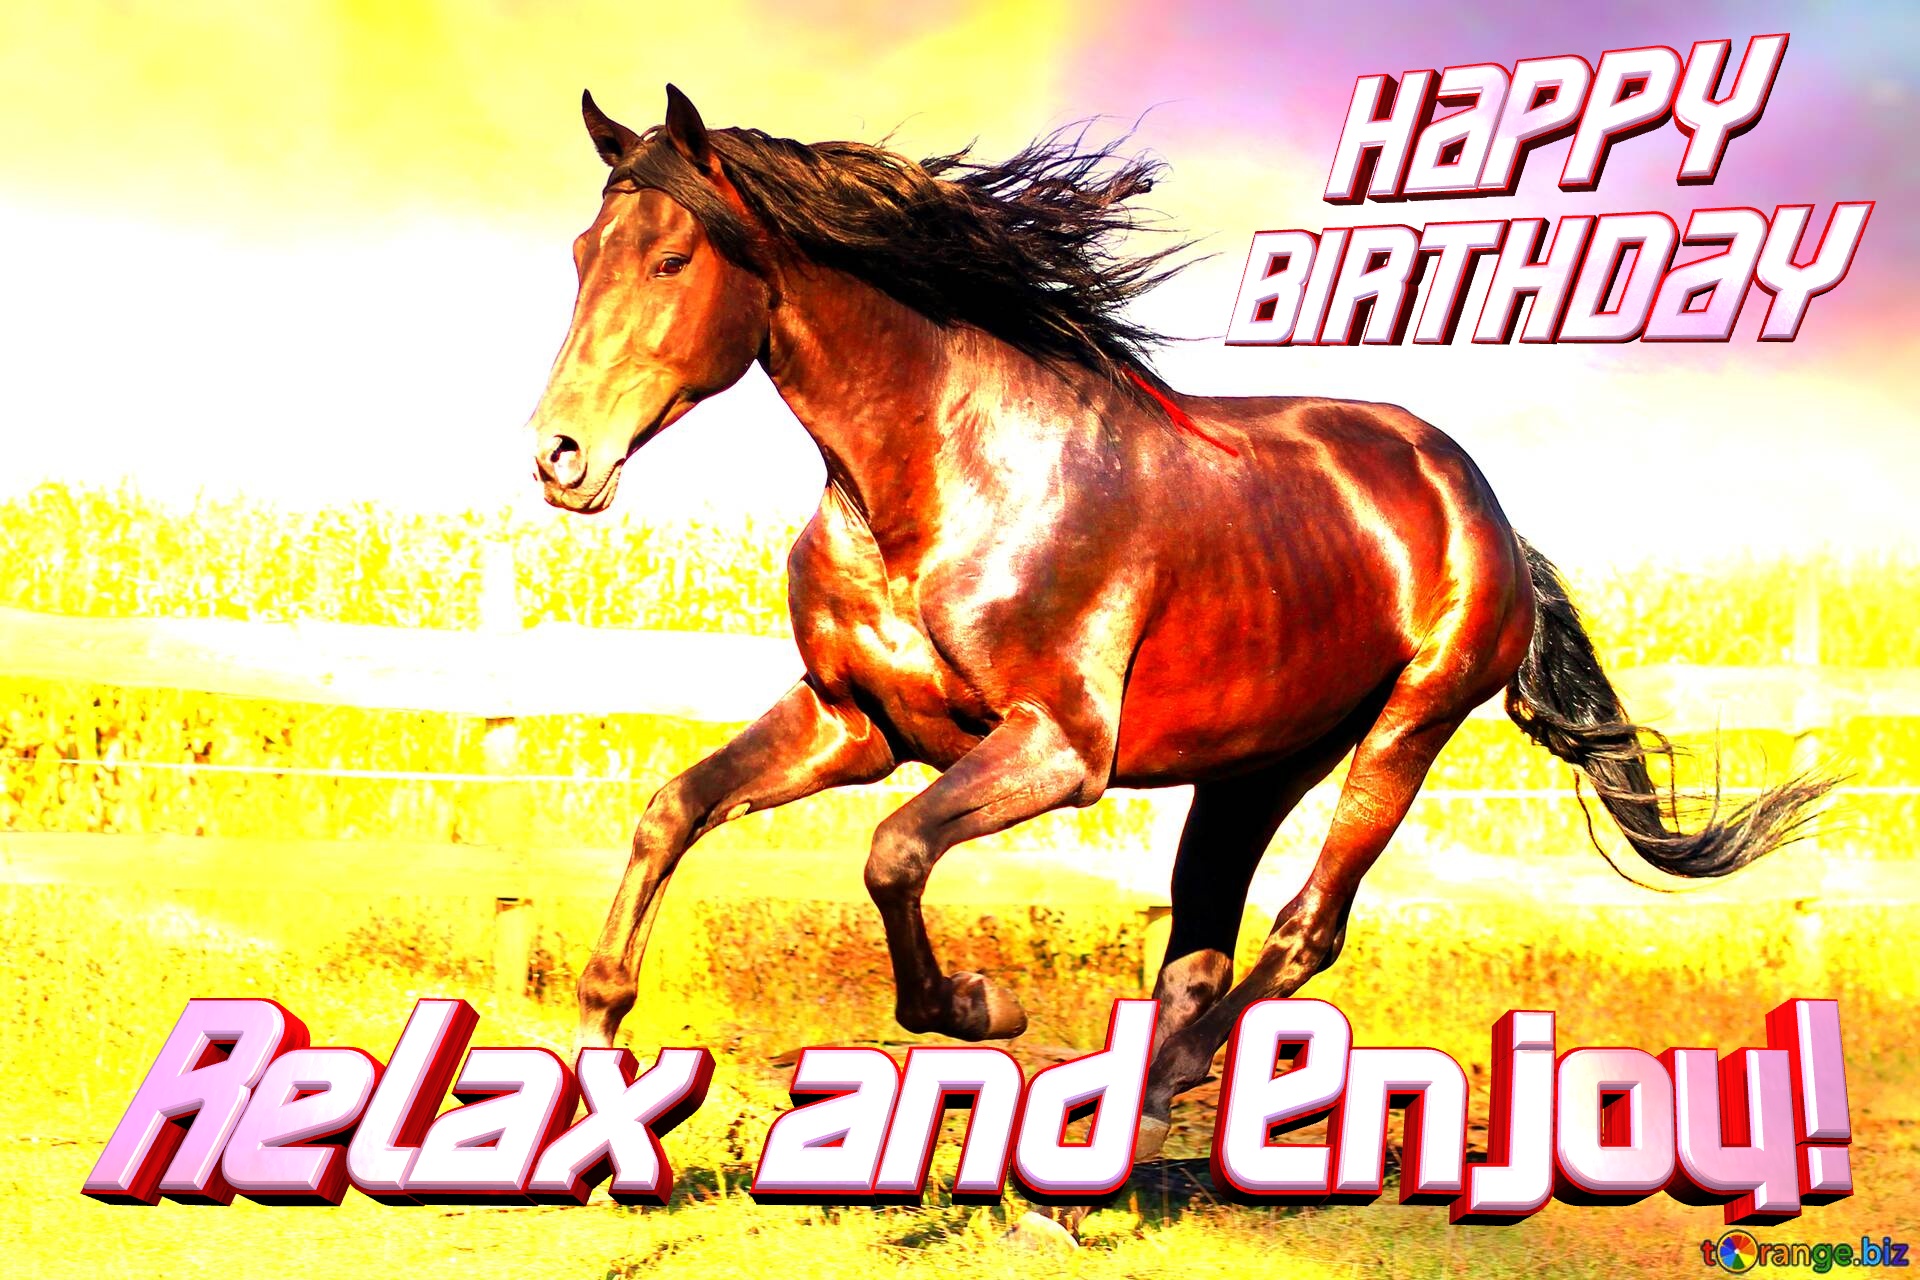 HAPPY BIRTHDAY card with HORSE Relax and Enjoy! Horse run №0